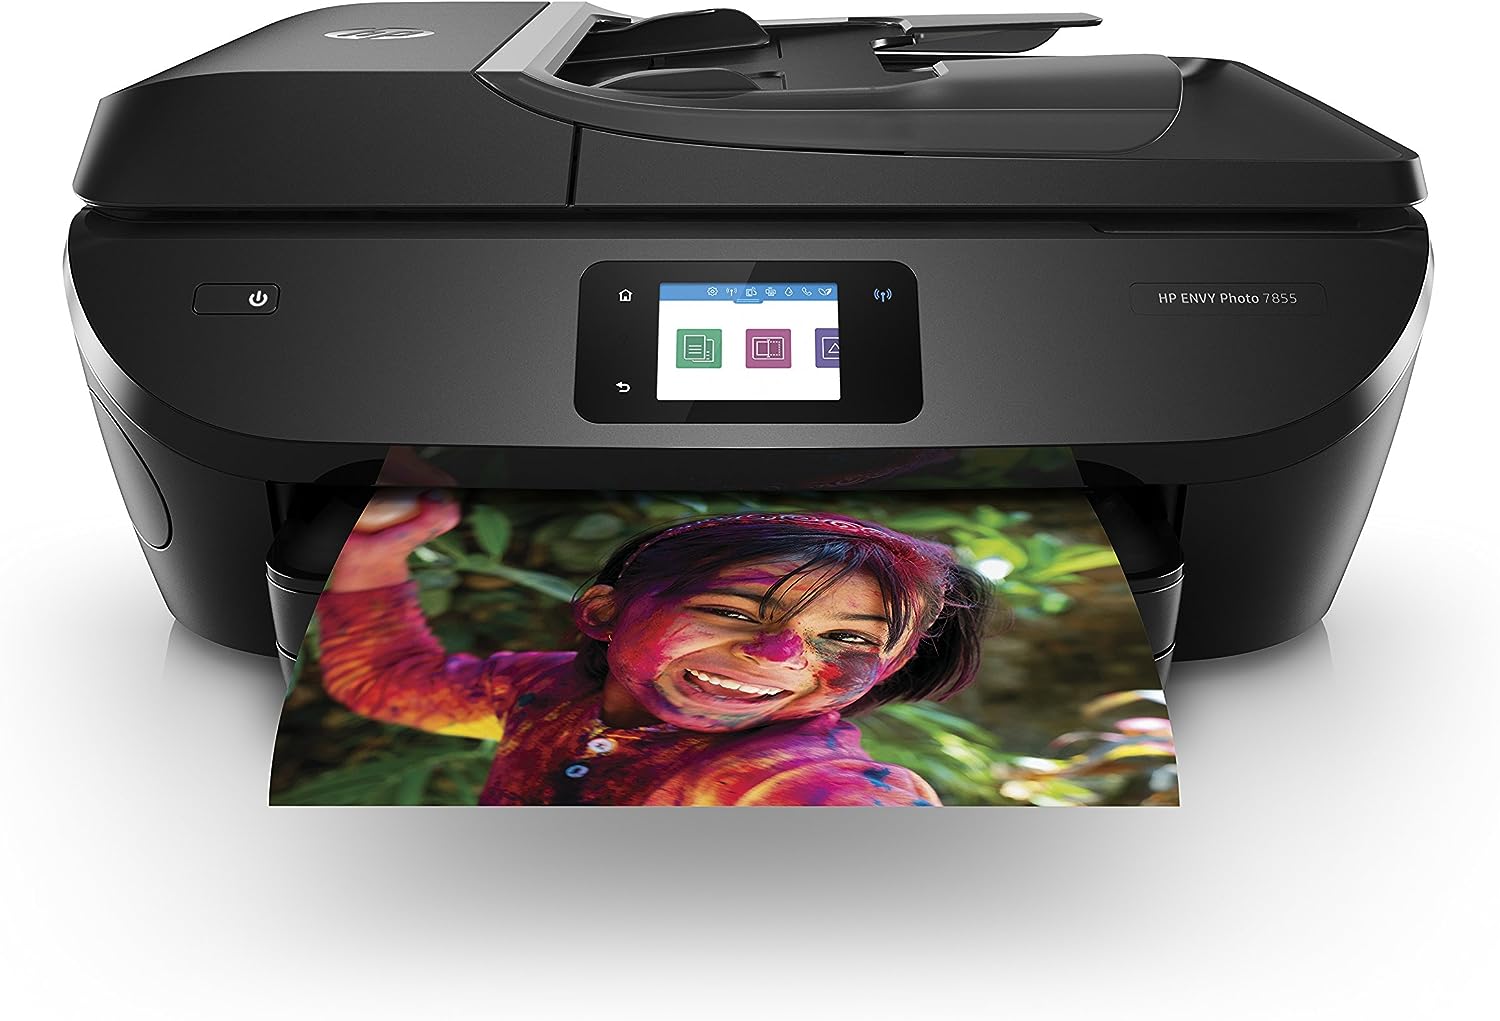 HP ENVY Photo 7855 All in One color Photo Printer with [...]